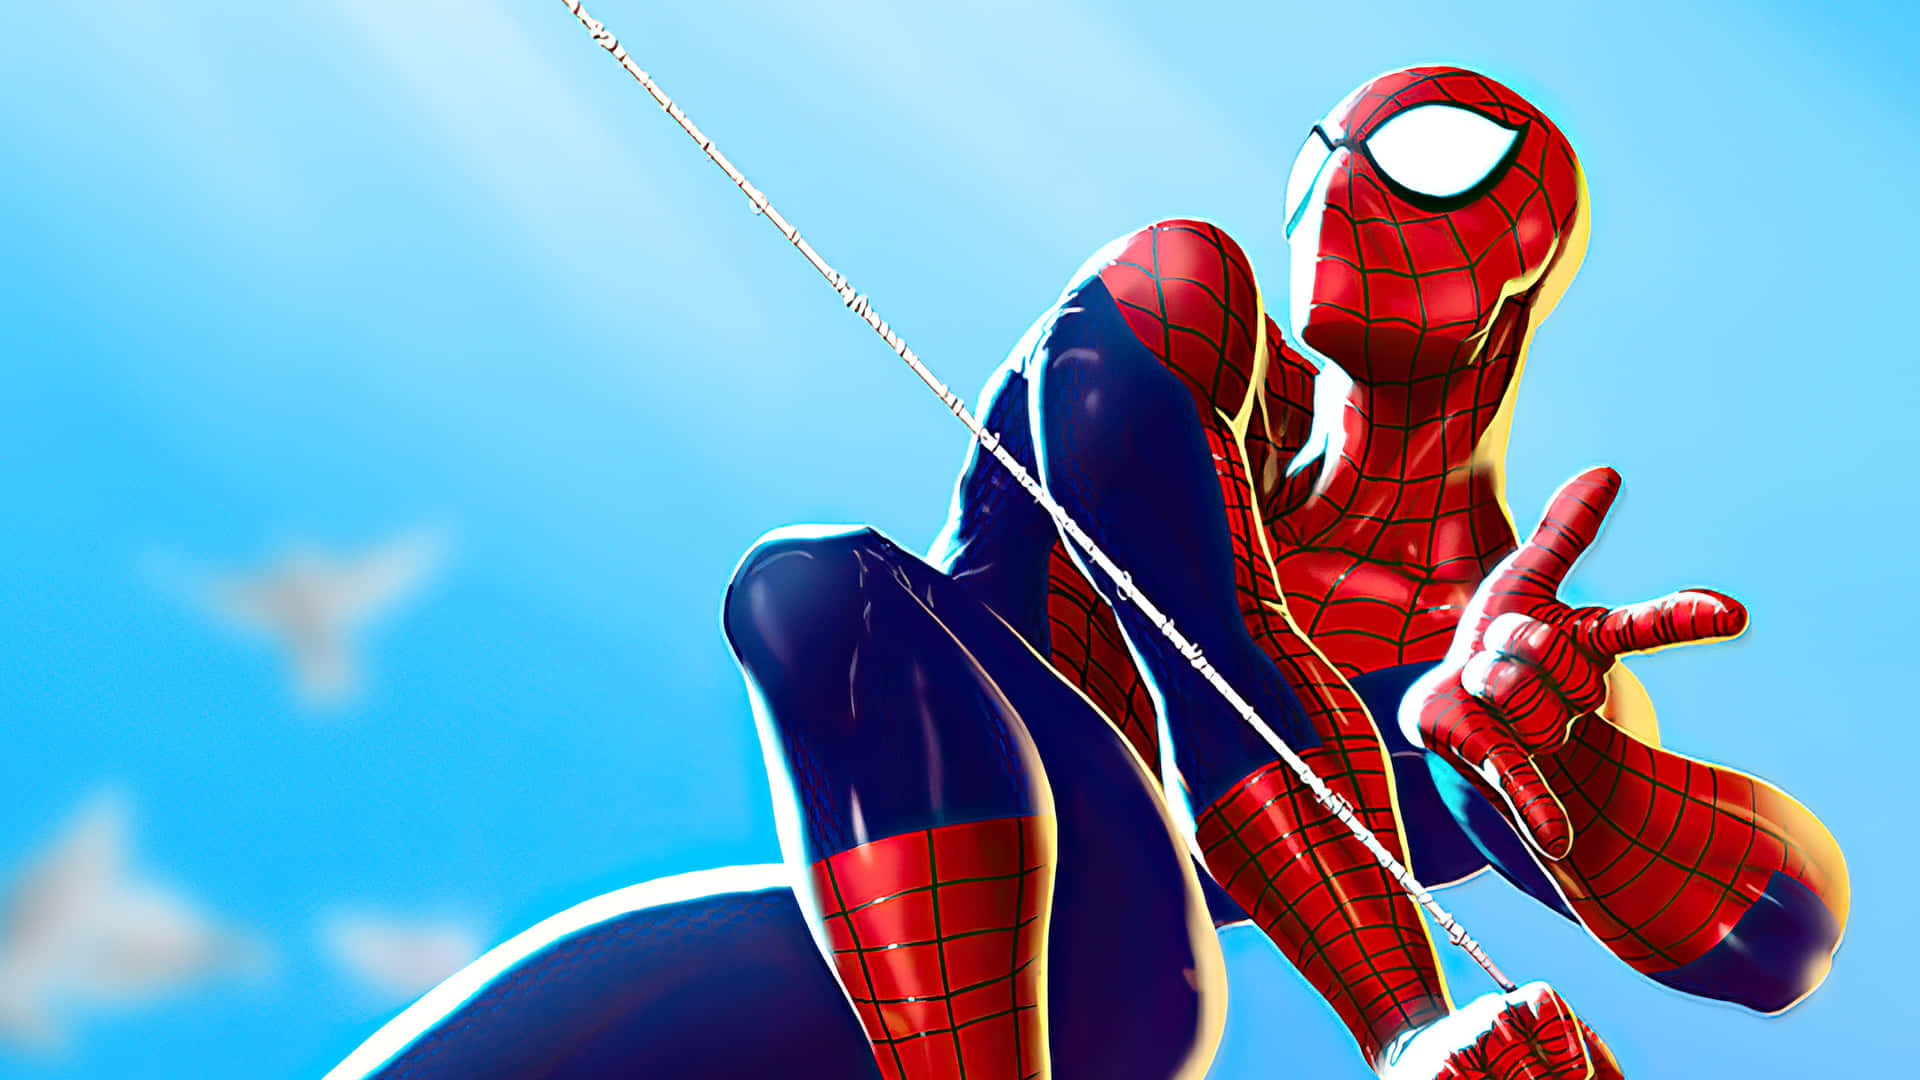 Spider-Man unleashing his web-shooters in action Wallpaper